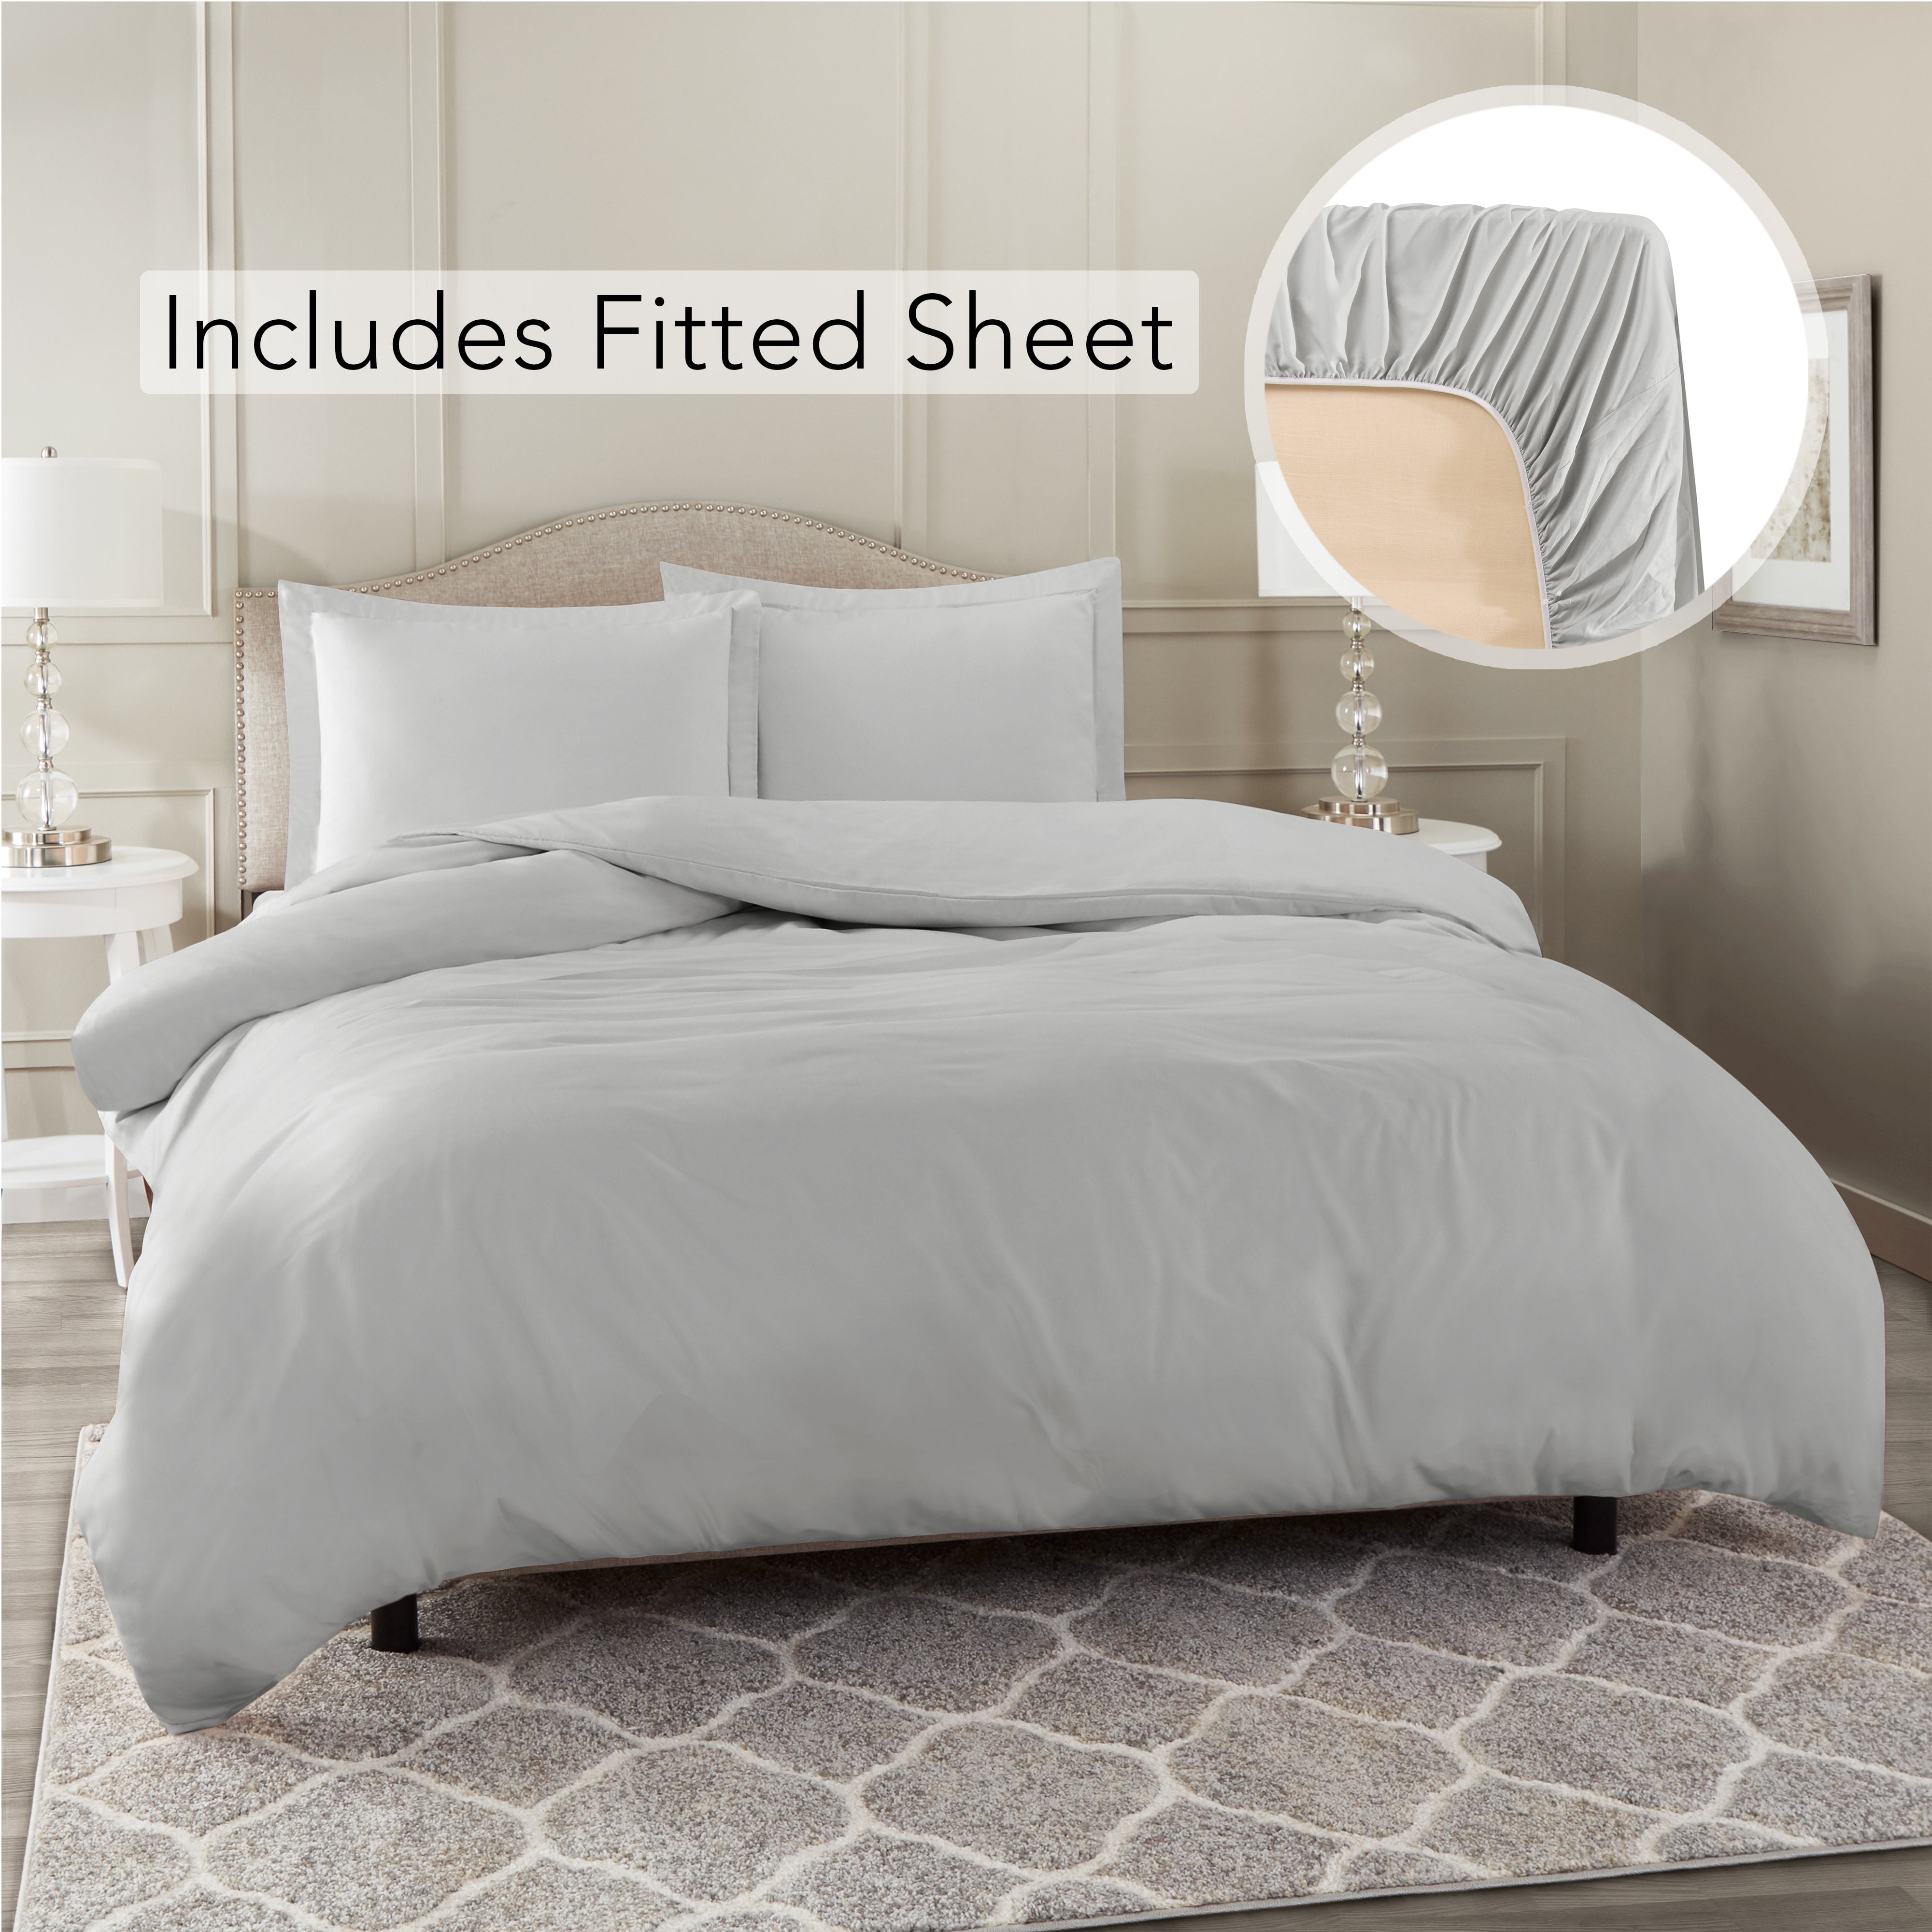 Nestl Split King Size Duvet Cover With, Should I Use A King Size Duvet On Double Bed